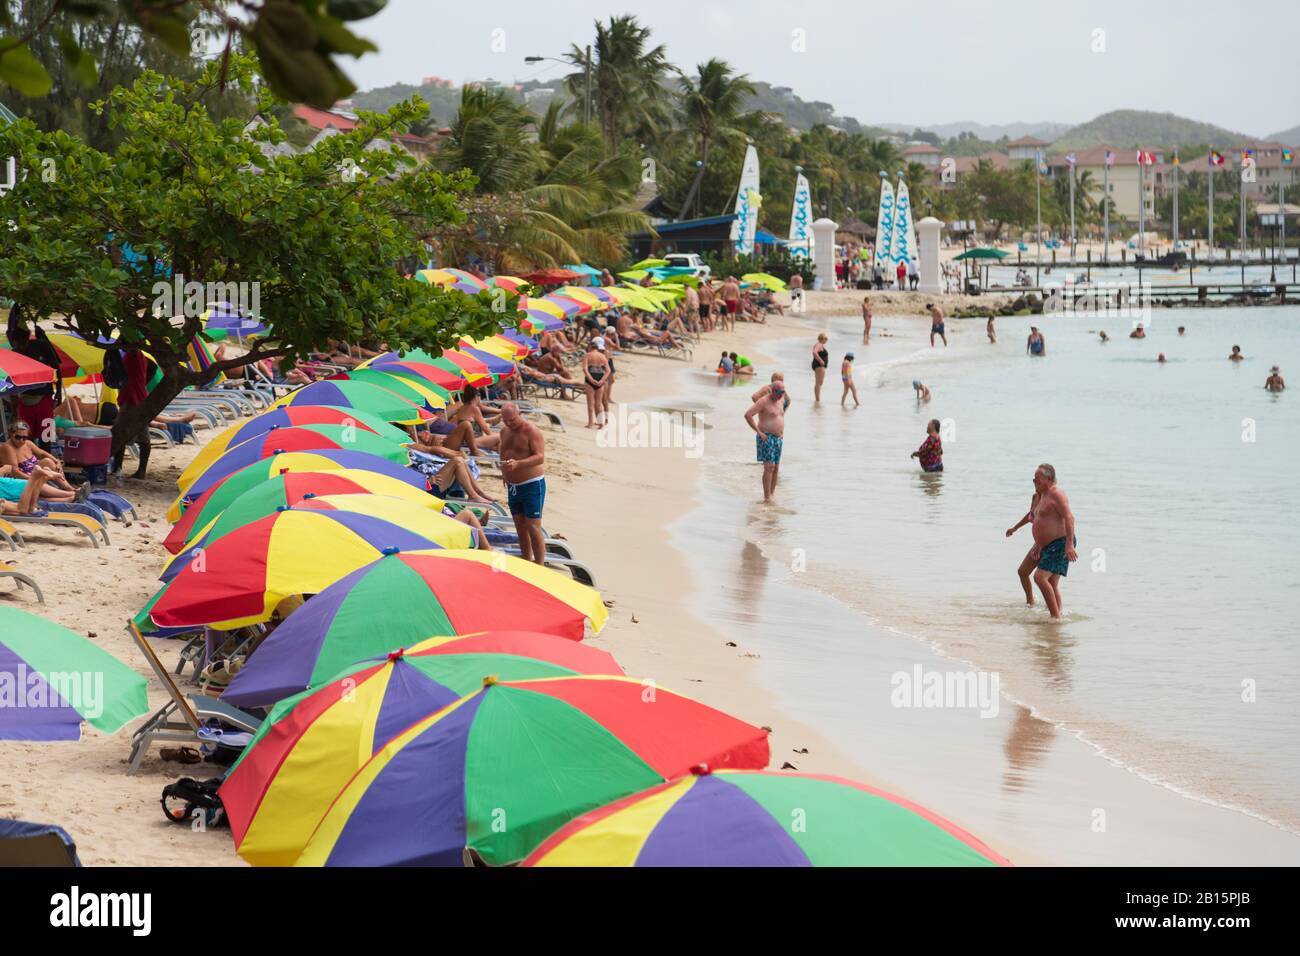 Allot of tourist activity and colorful beach umbrellas, beach fun on a popular beach on a bright sunny day Stock Photo